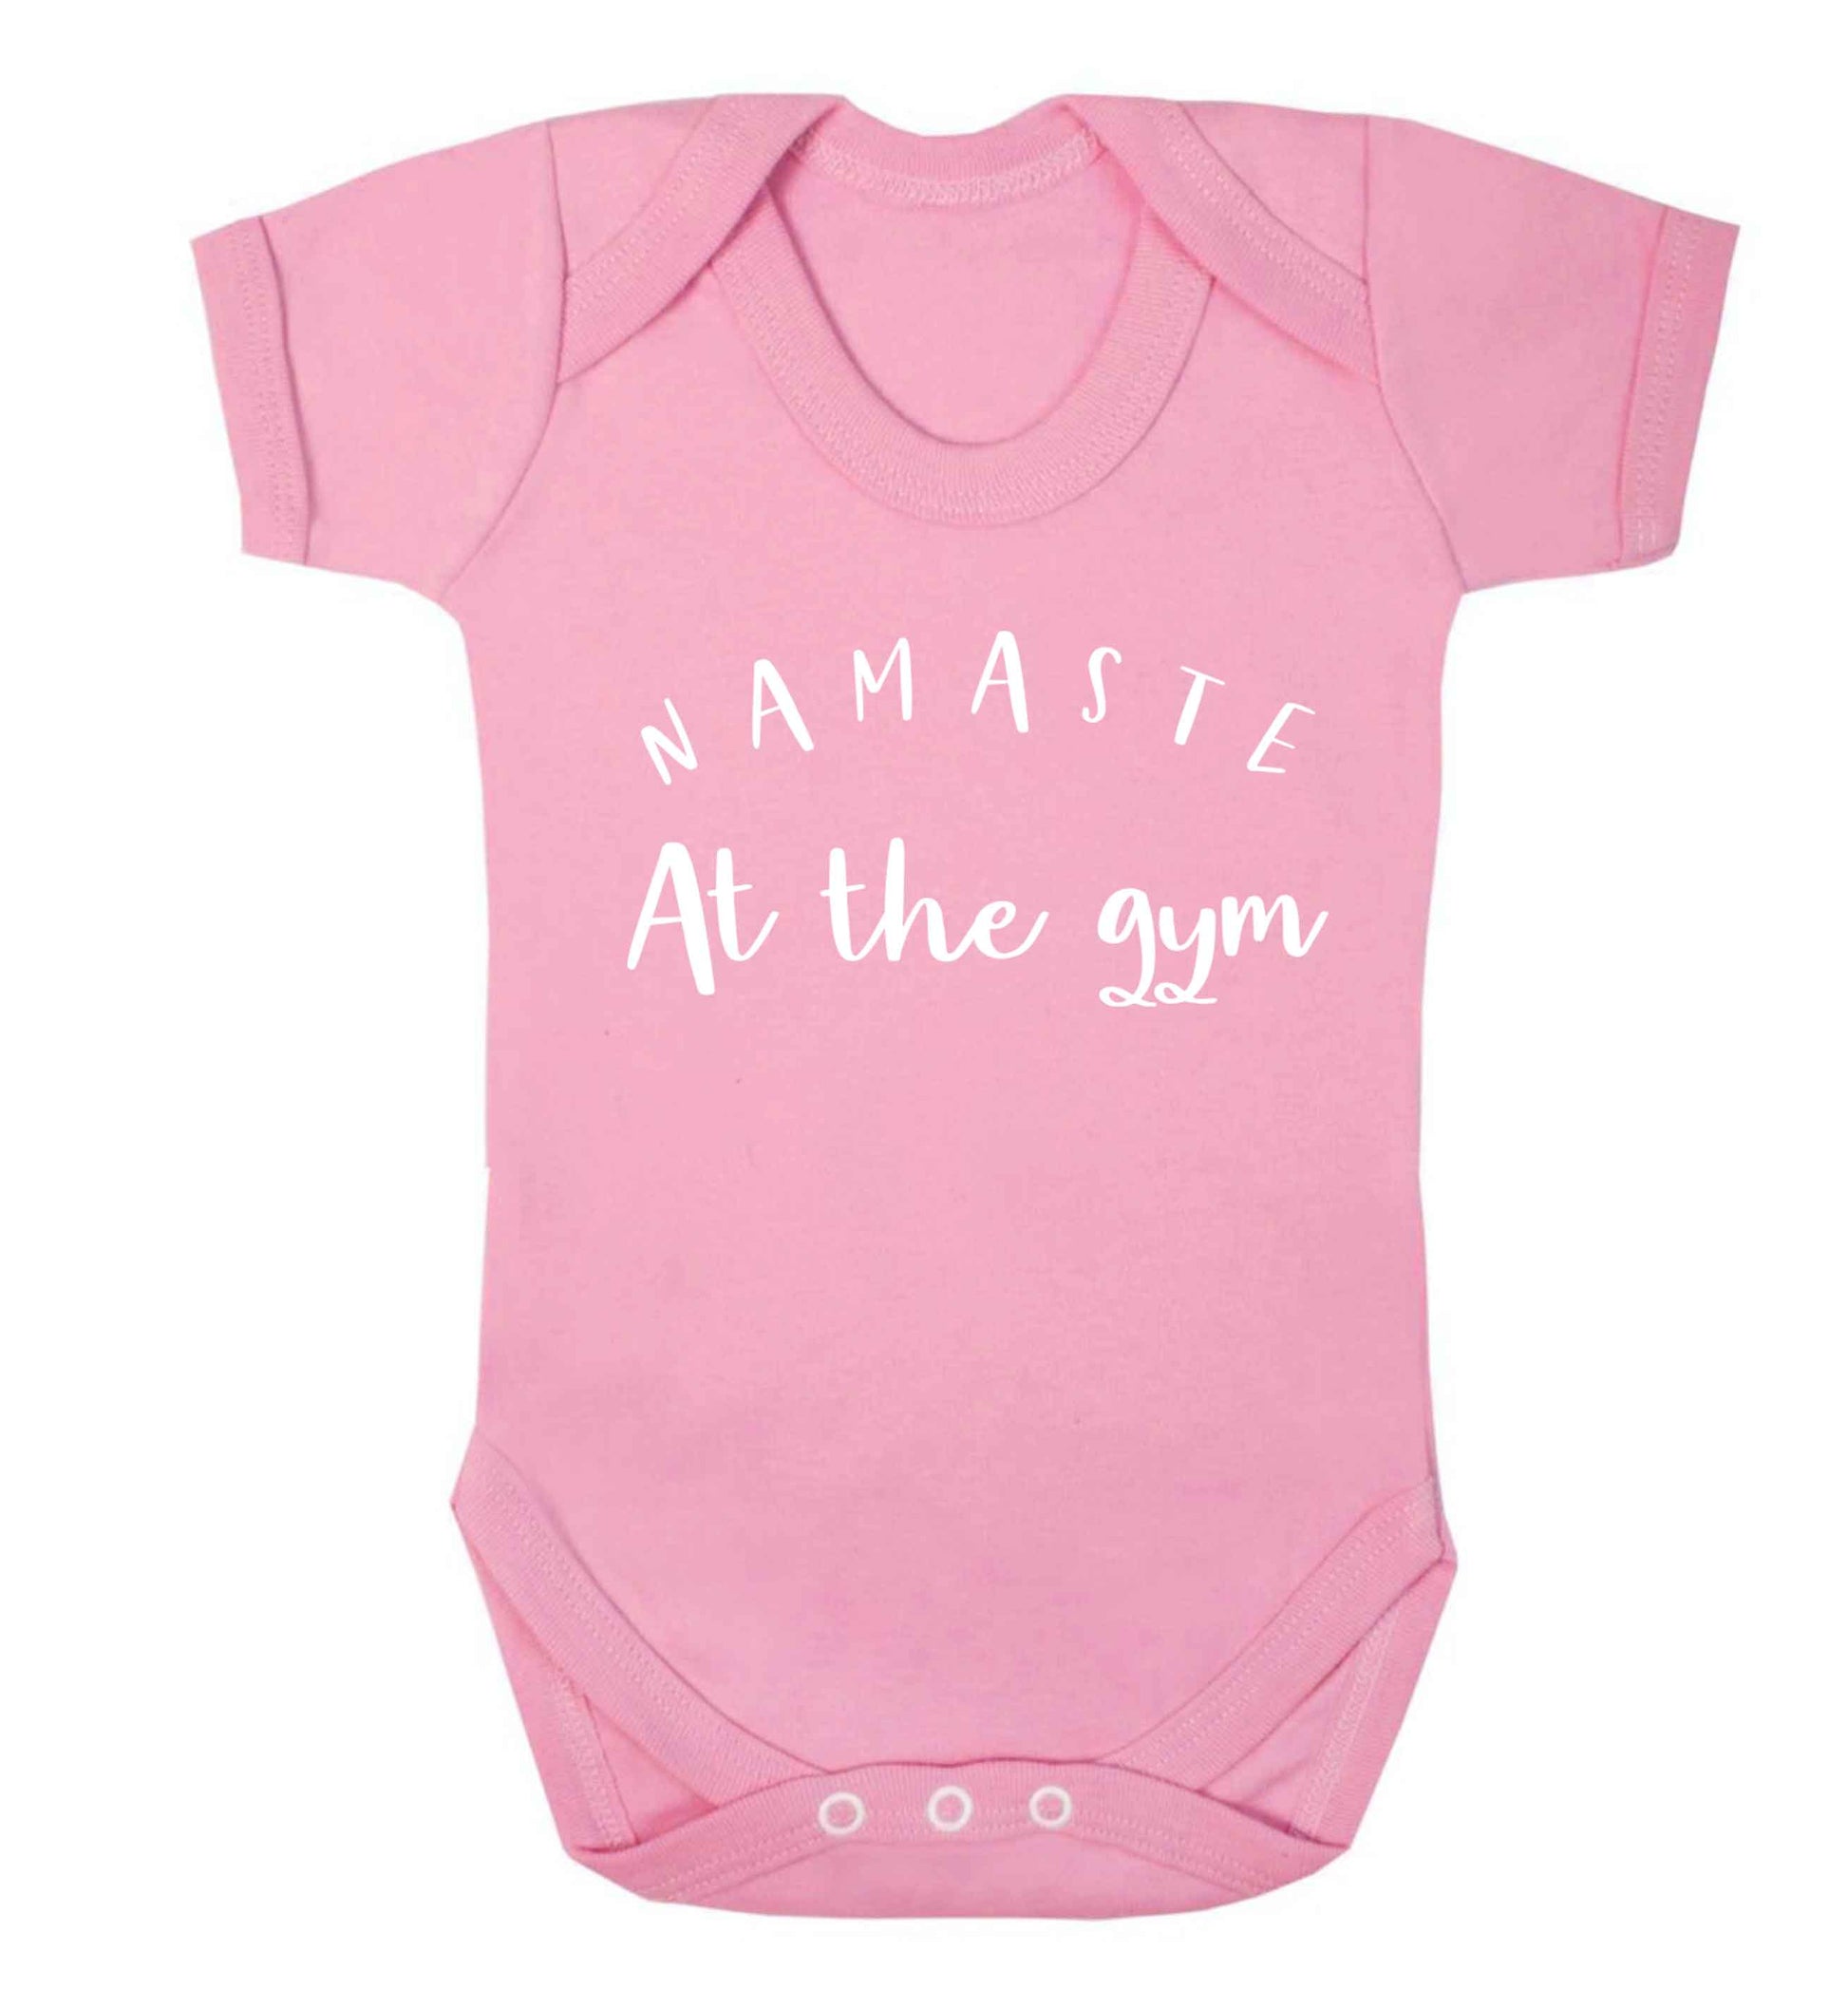 Namaste at the gym Baby Vest pale pink 18-24 months